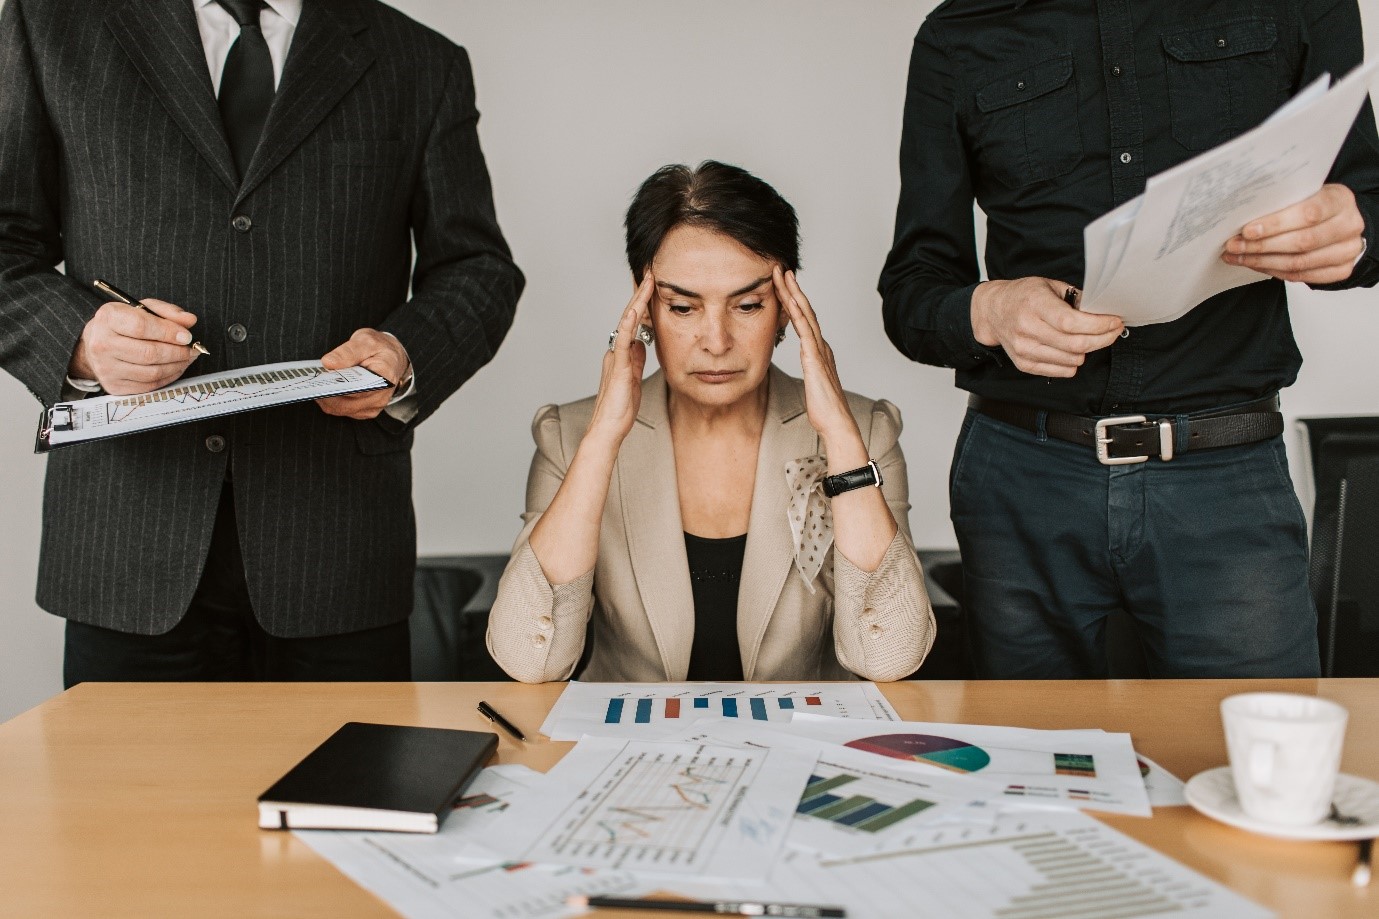 Can coaching reduce workplace stress?